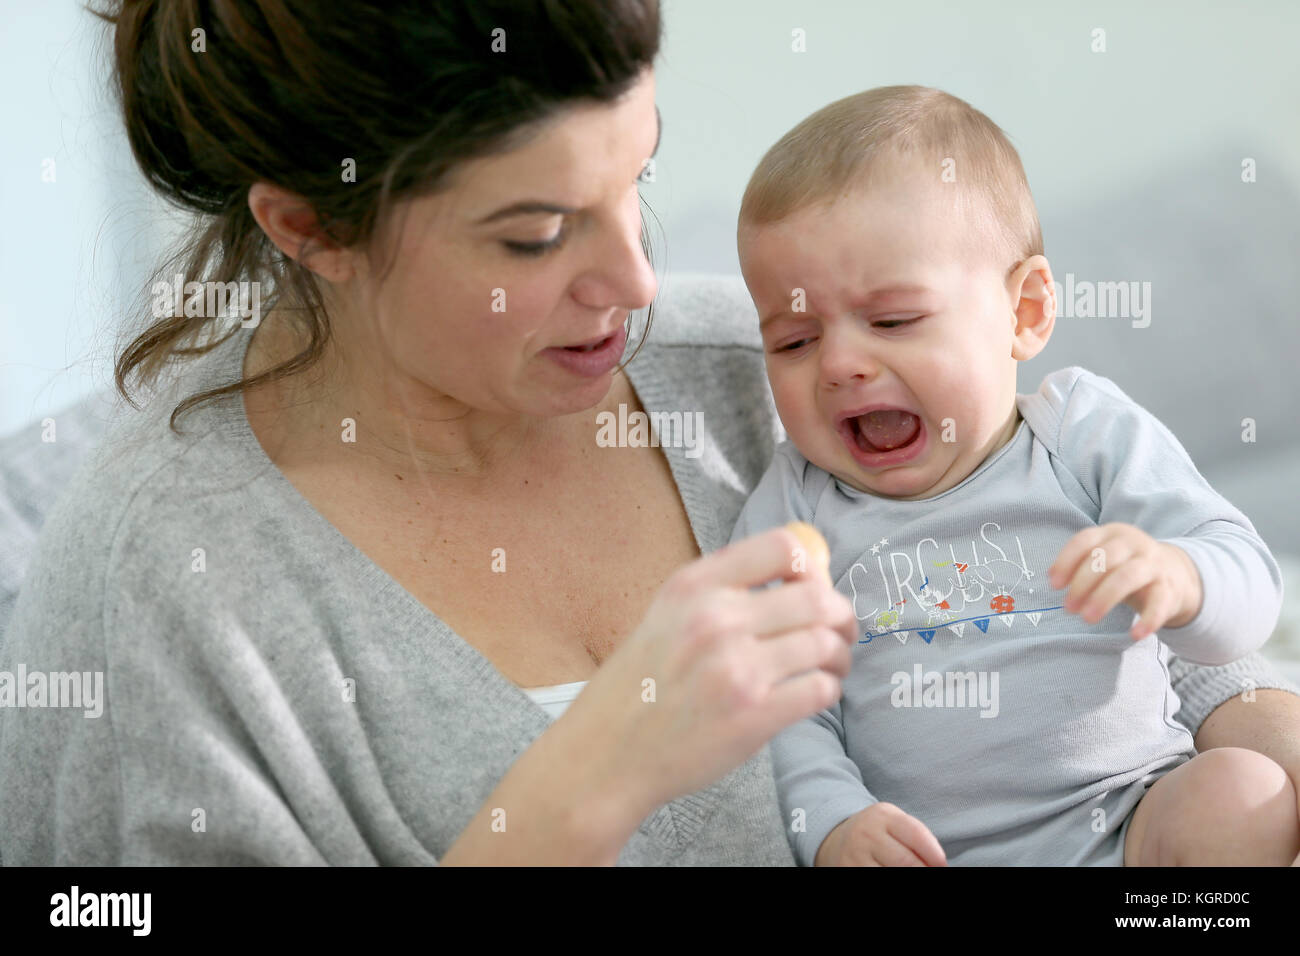 Baby boy crying to have food Stock Photo